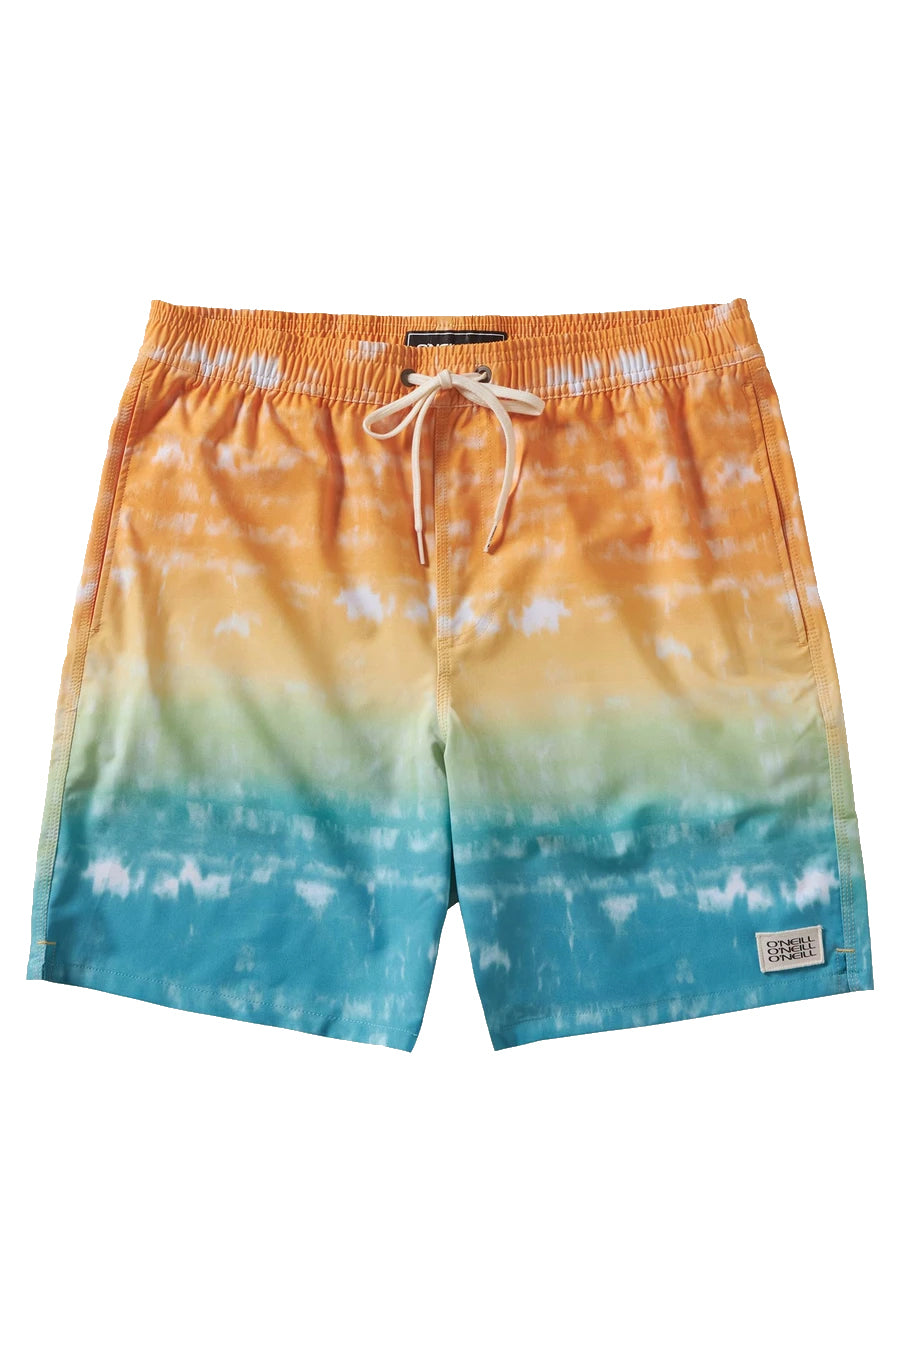 O'neill Mixed Up 17" Volley Boardshorts MUL-Multi S